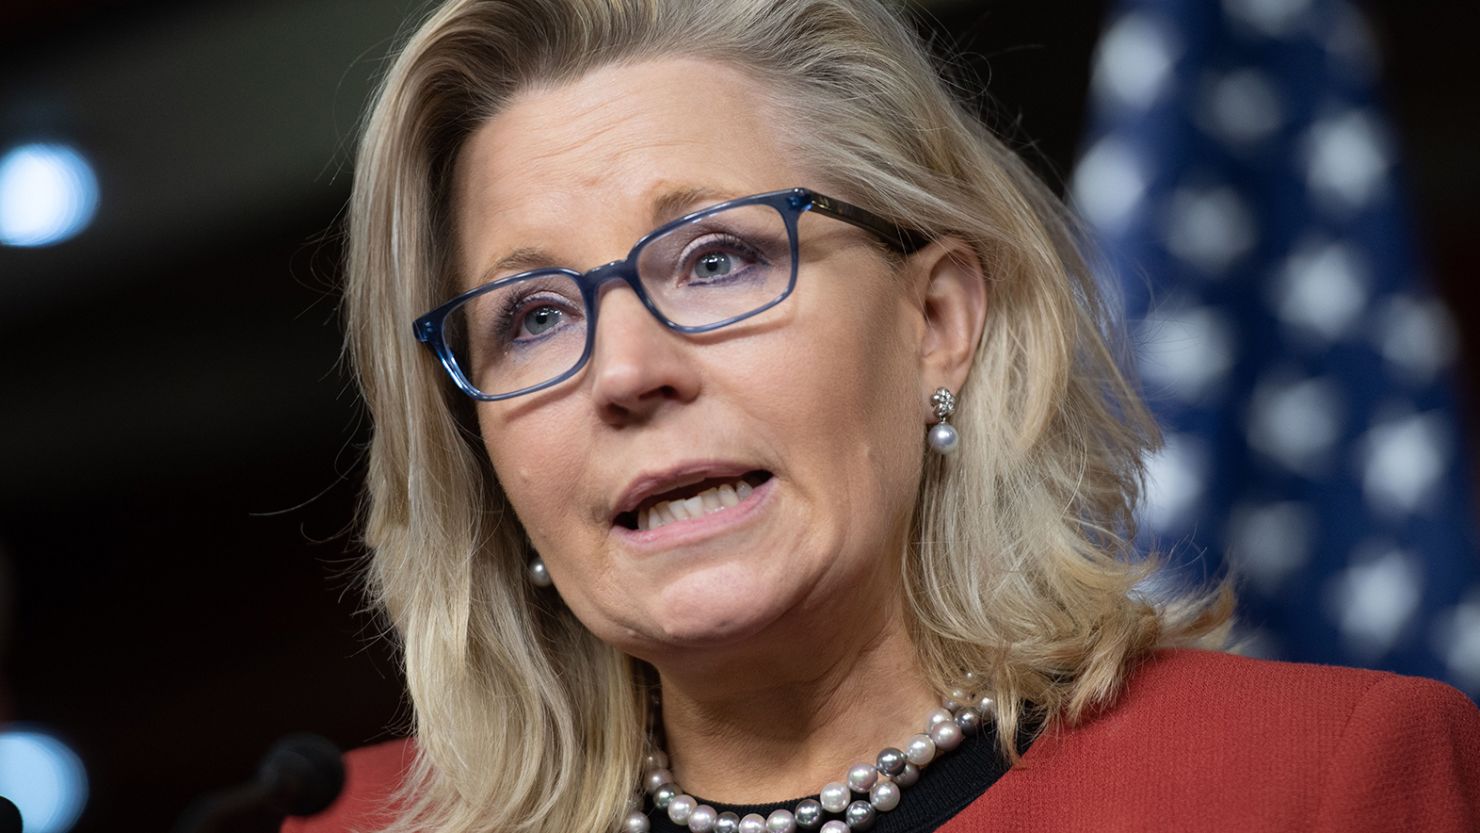 US Rep. Liz Cheney speaks during a Capitol Hill news conference in October 2019.